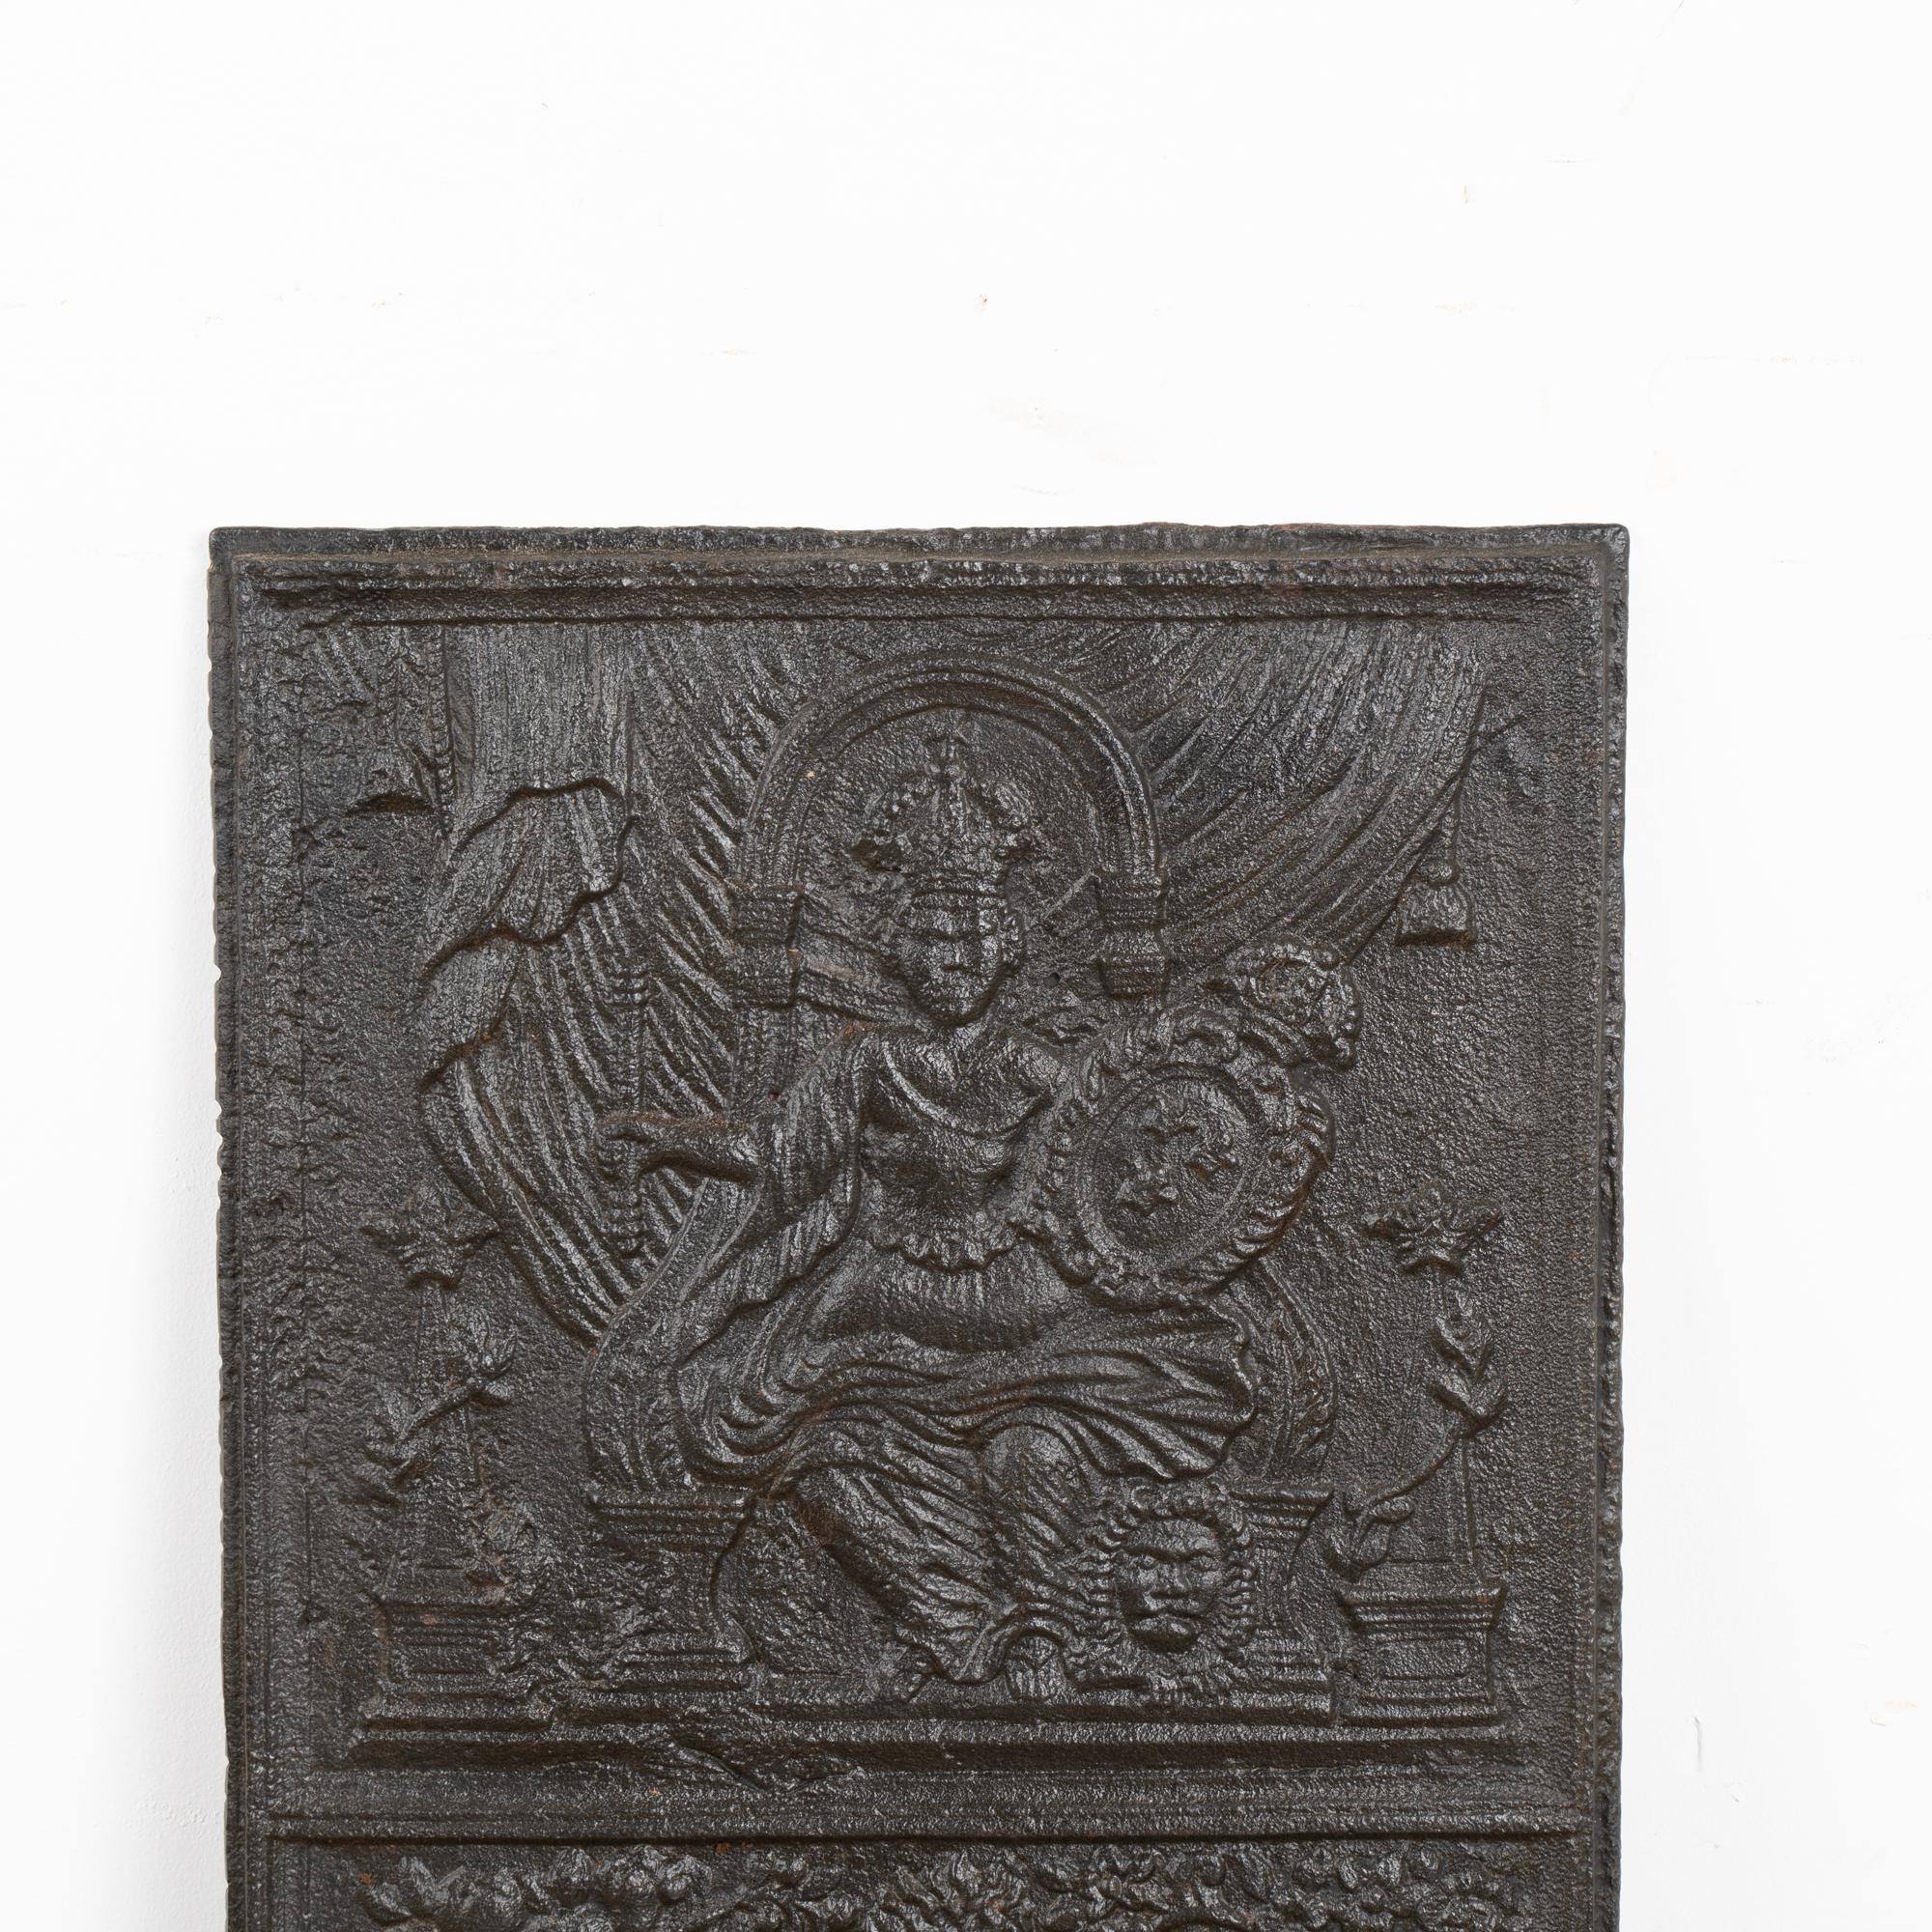 Swedish Decorative Cast Iron Fire Back With Queen, Sweden circa 1760-80 For Sale